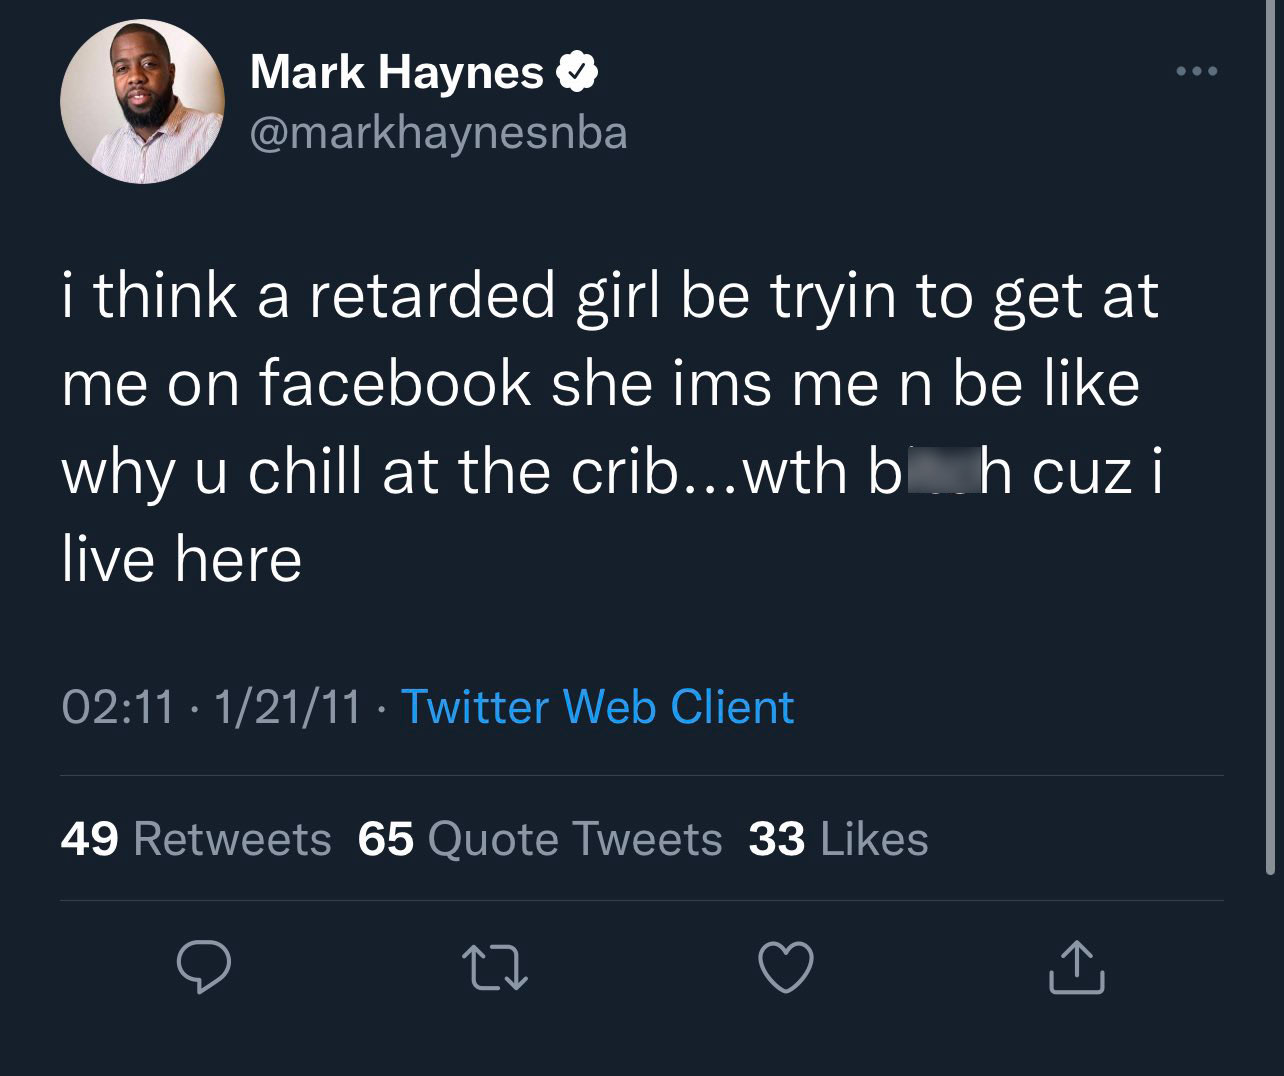 Mark Haynes NBA tweets - screenshot - ... Mark Haynes i think a retarded girl be tryin to get at me on facebook she ims me n be why u chill at the crib...wth bitch cuz i live here 12111. Twitter Web Client 49 65 Quote Tweets 33